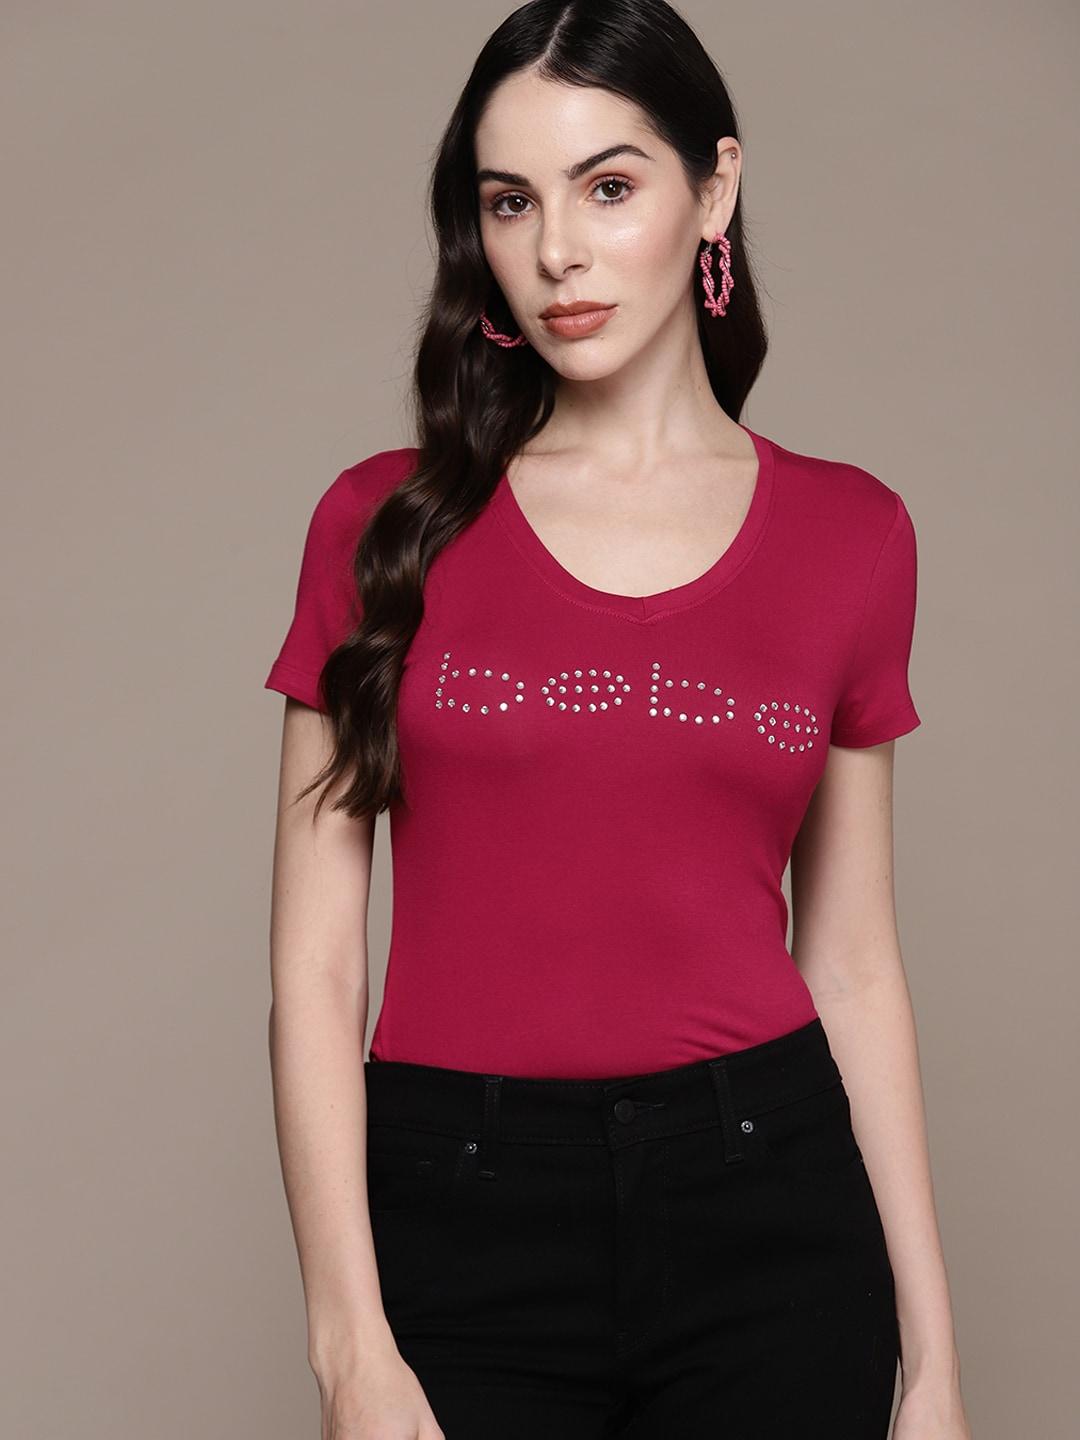 bebe-season-staples-brand-logo-embellished-fitted-top